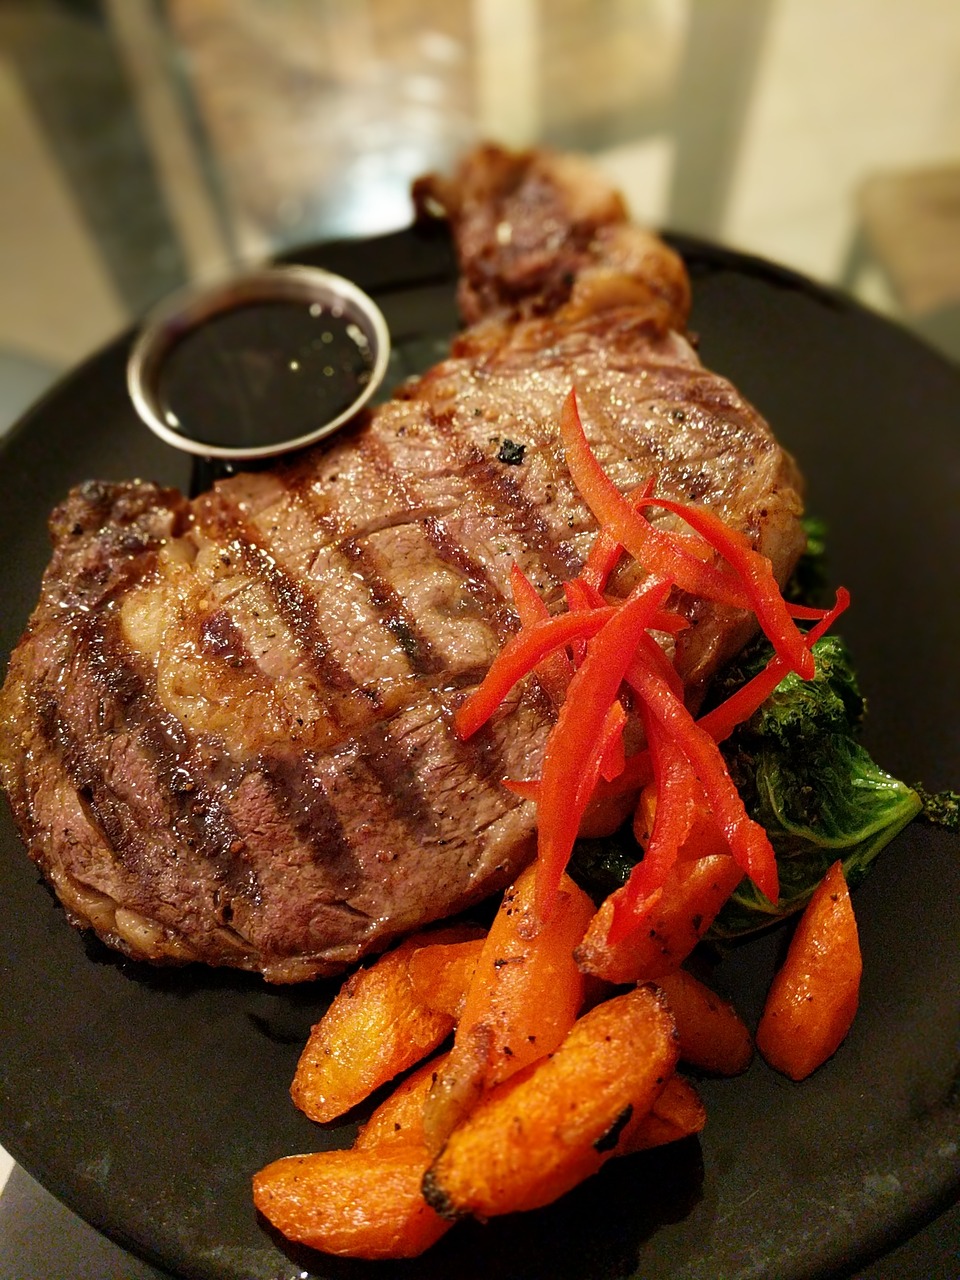 Grilled Sirloin Steak With Olive Sauce